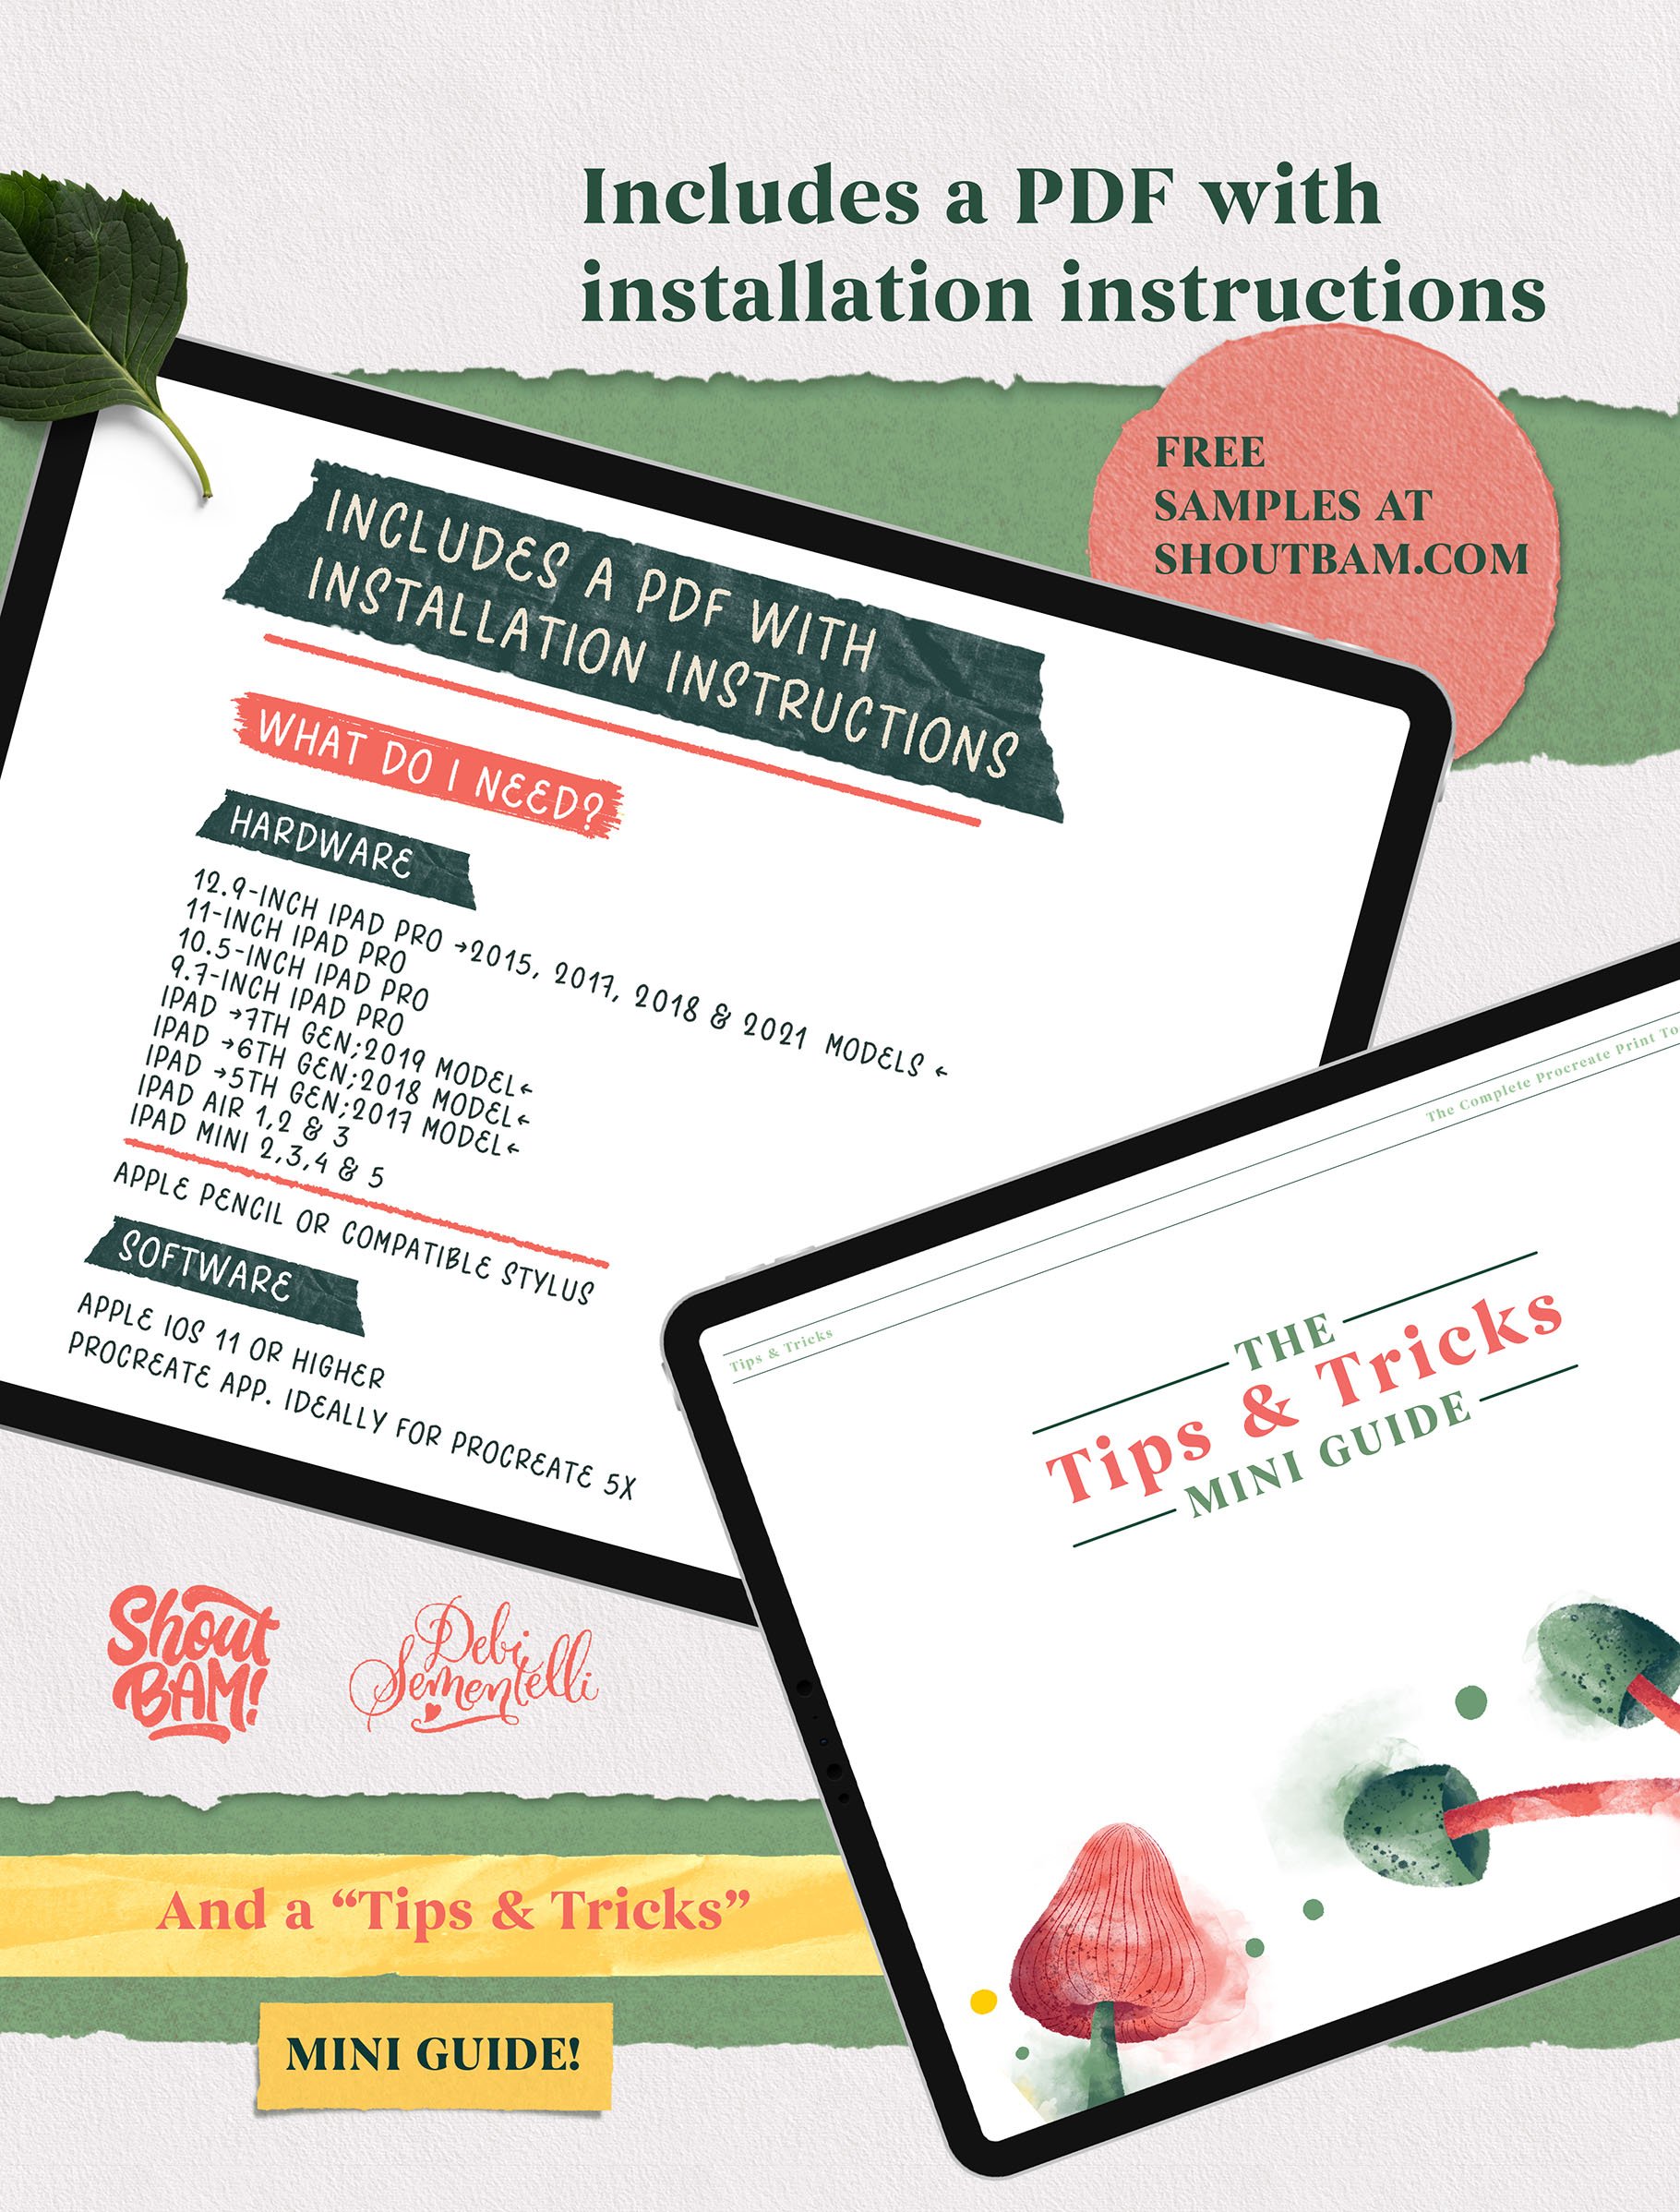 This bundle includes a PDF file with installation instruction.